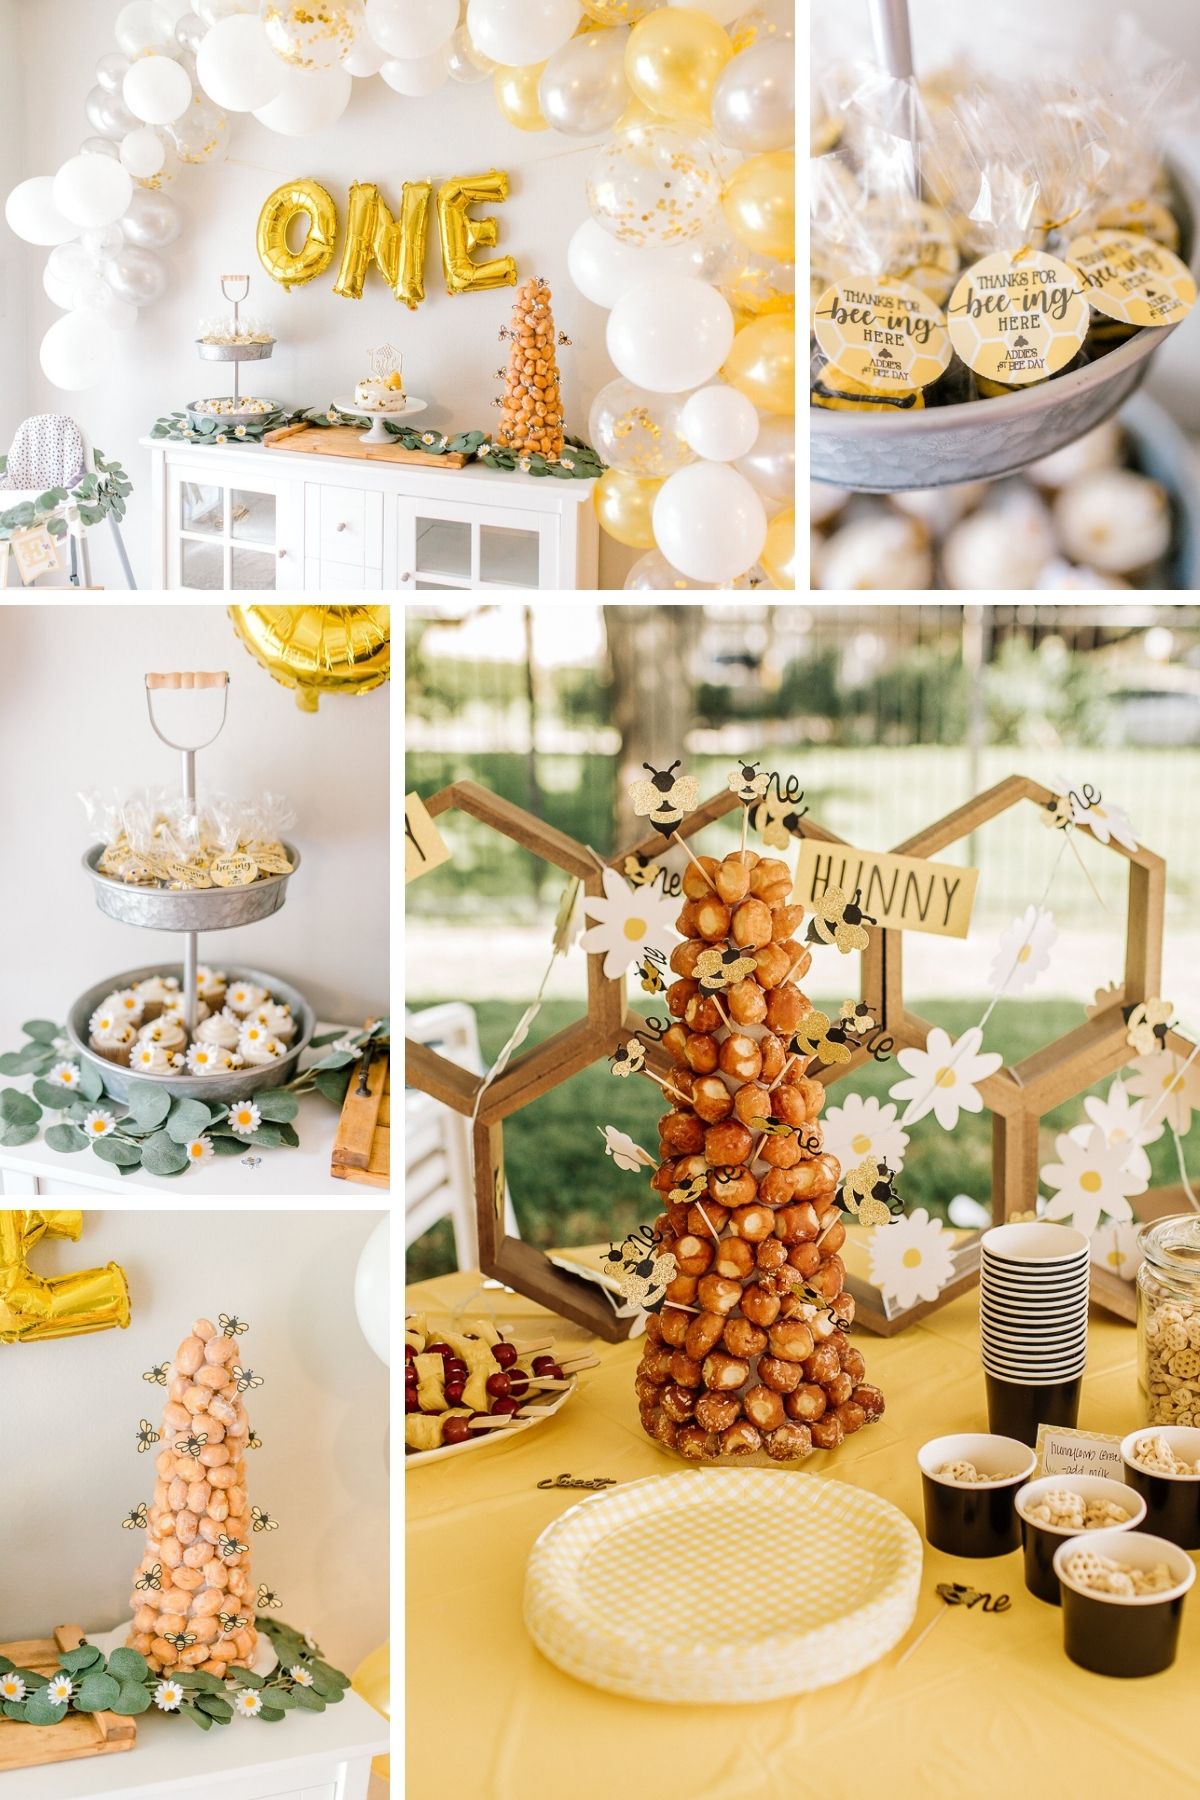 Photo collage for first bee-day party theme including dessert table, cakes, and balloons.